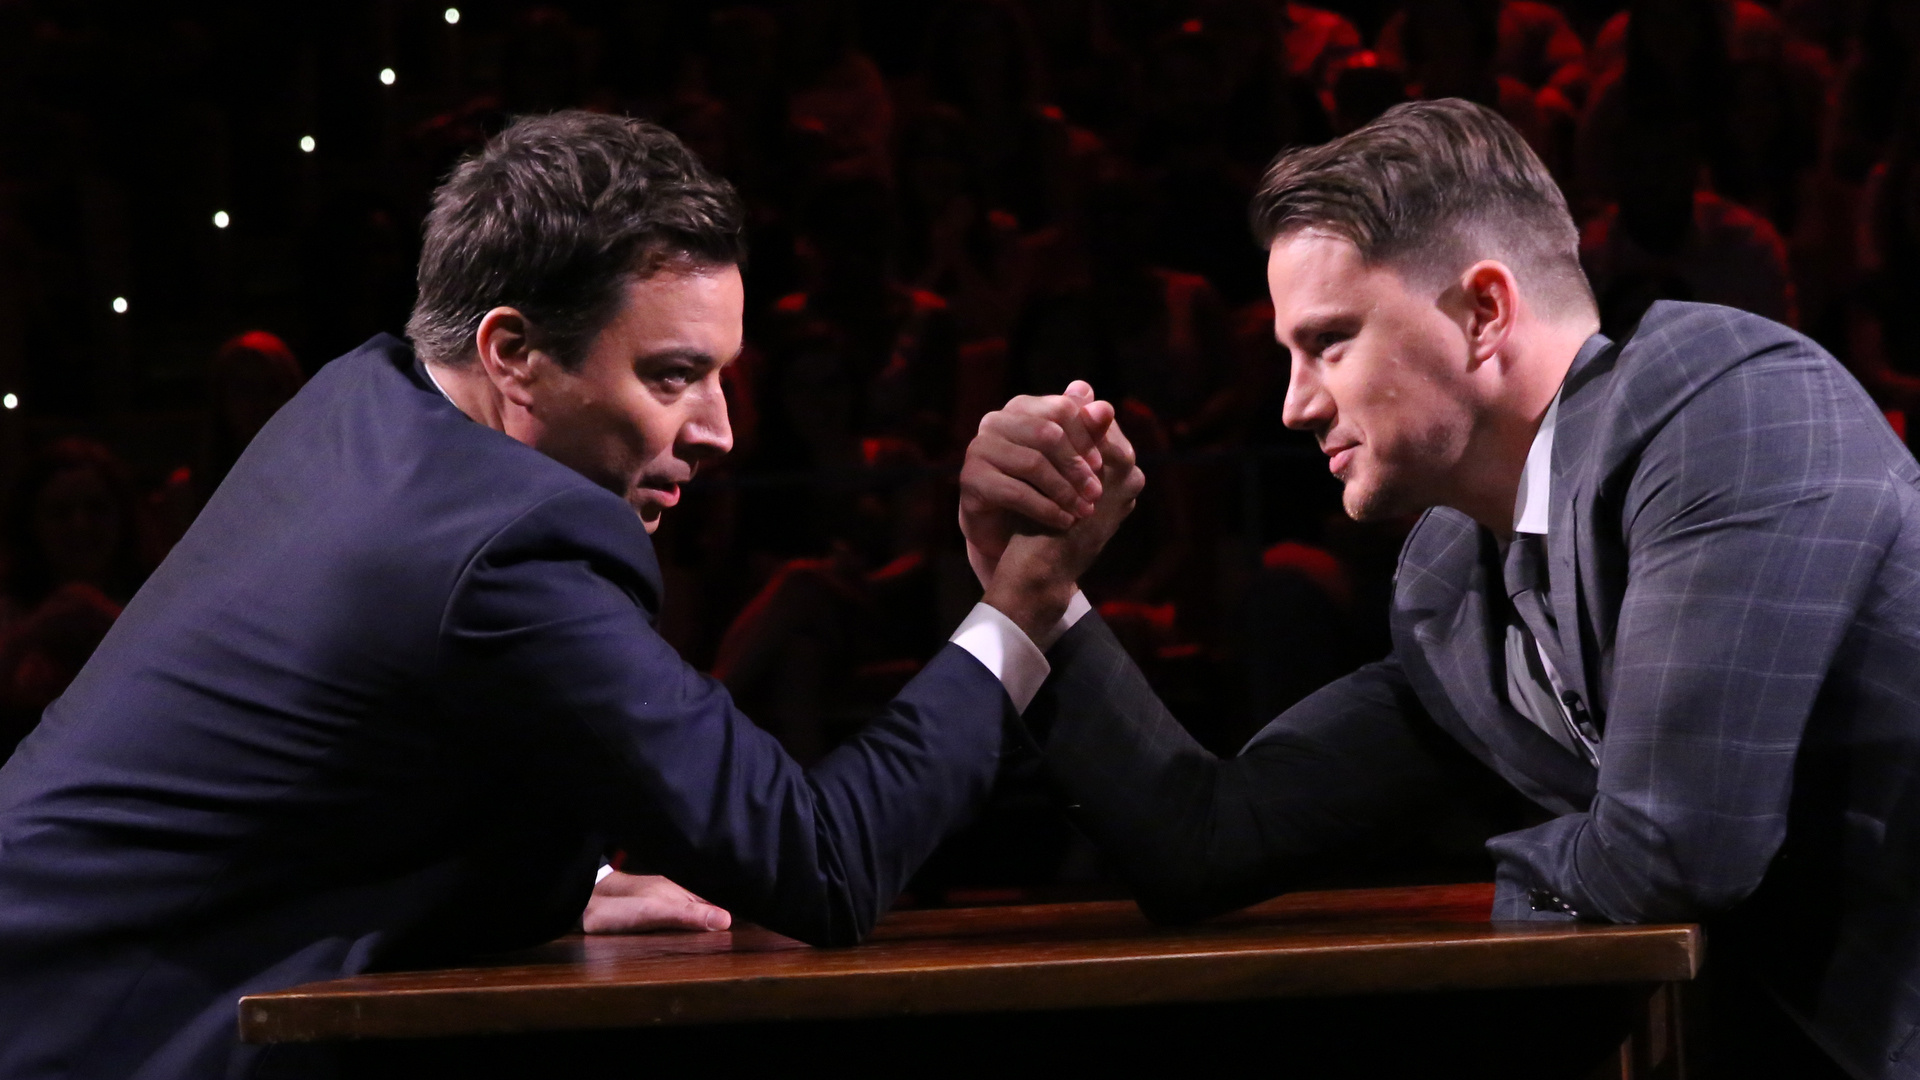 Arm Wrestling: Jimmy Fallon Jokingly Wrestles on Hands With Channing Tatum, The Tonight Show Starring Jimmy Fallon. 1920x1080 Full HD Background.